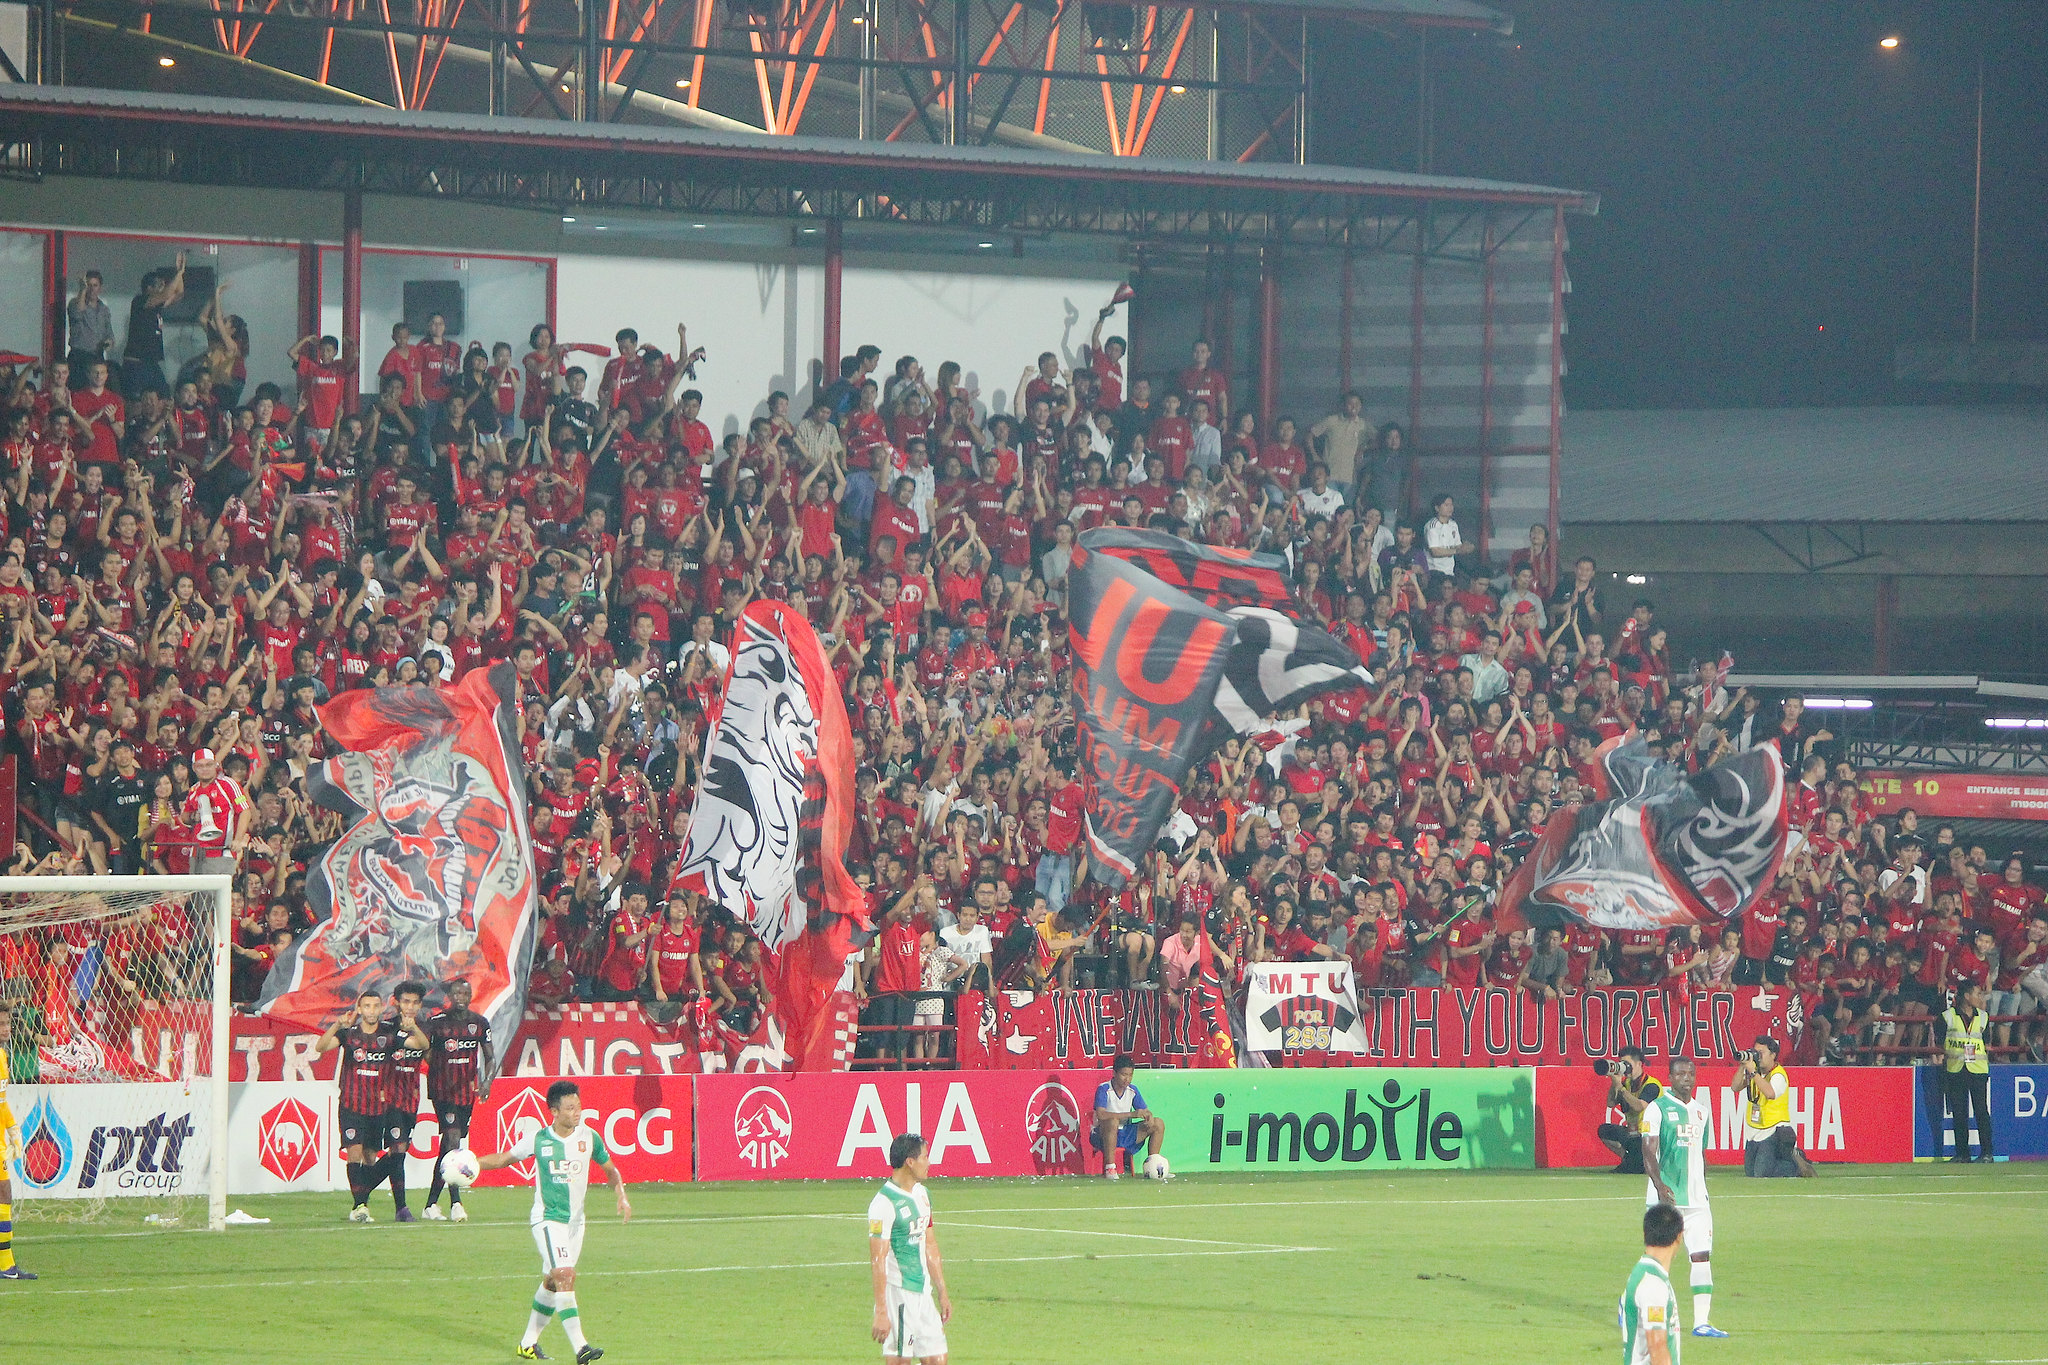 Muangthong United supporters.